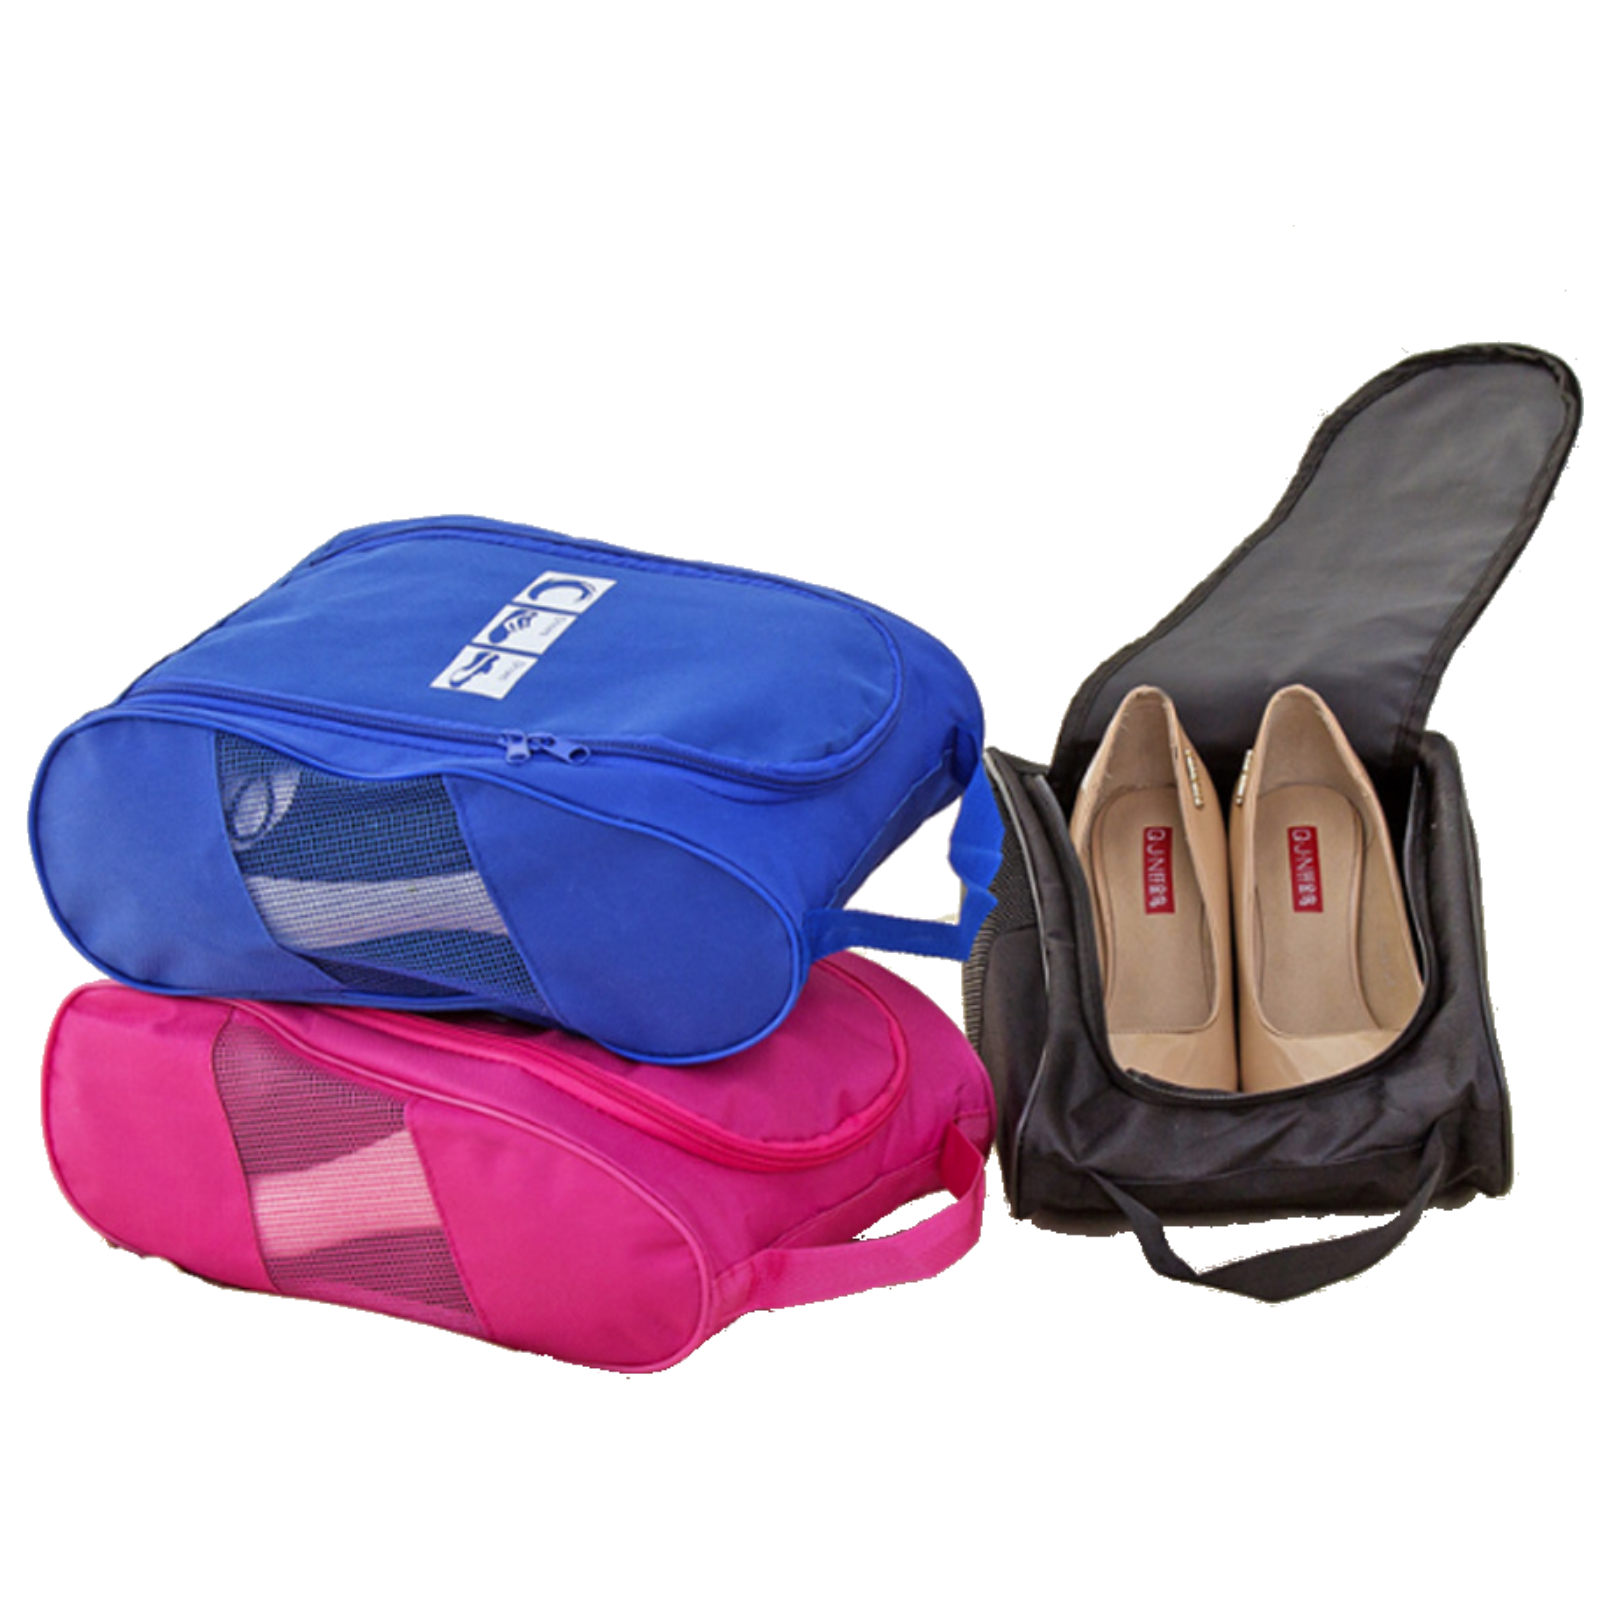 shoe bags when travelling